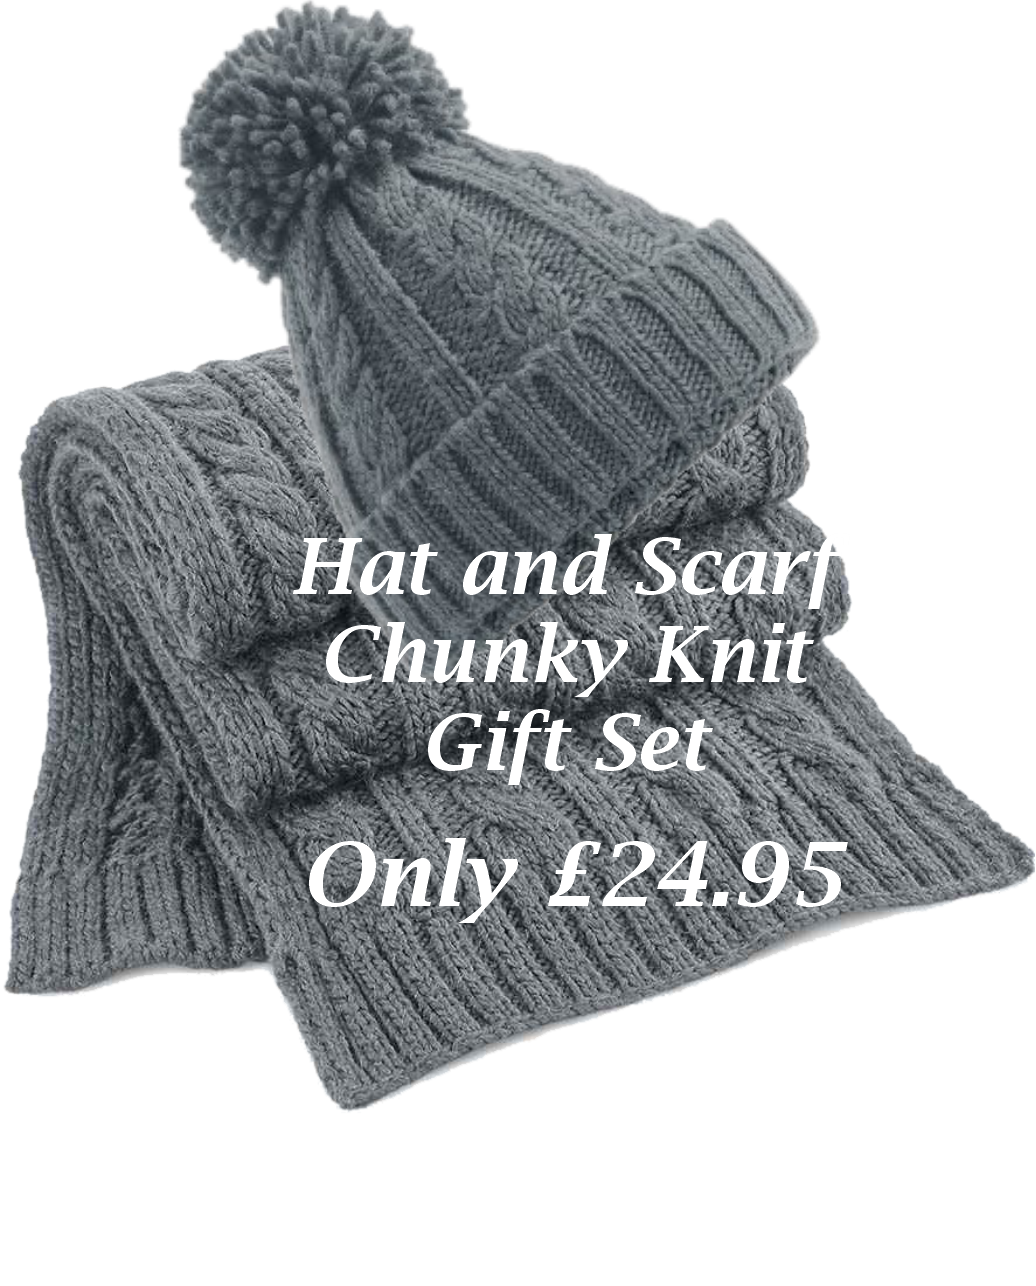 Chunky Cable Knit Hat & Scarf Set Buckingham | Stork Countrywear